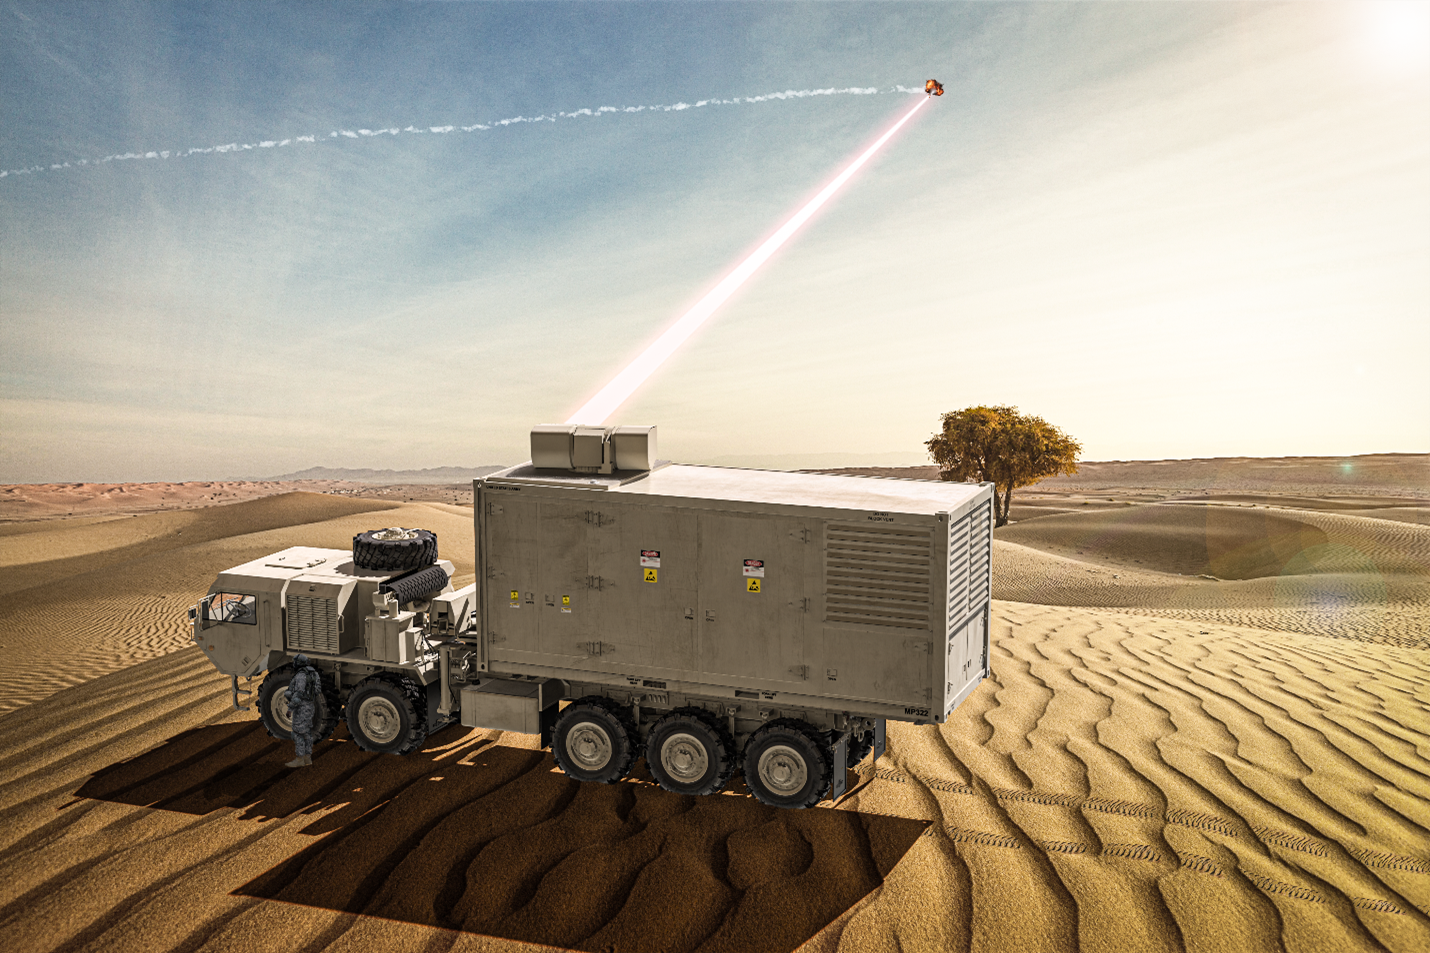 US Army’s Indirect Fires Protection Capability-High Energy Laser (IFPC-HEL) Demonstrator laser weapon system